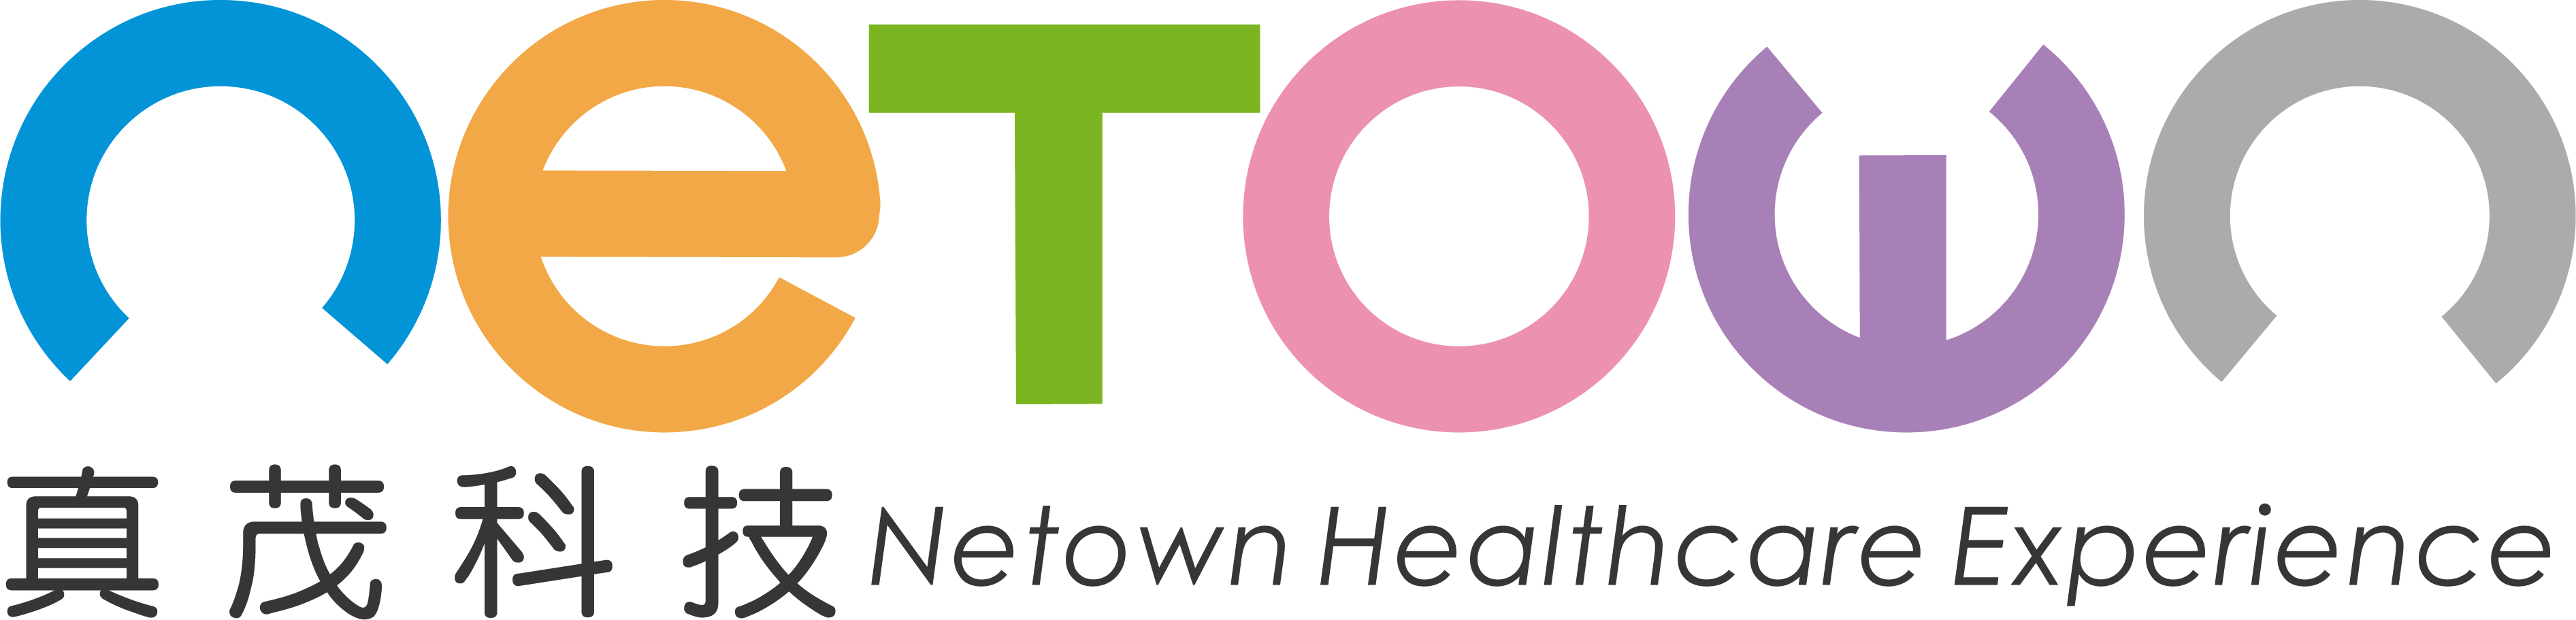 Netown healthcare experience logo+CH.png